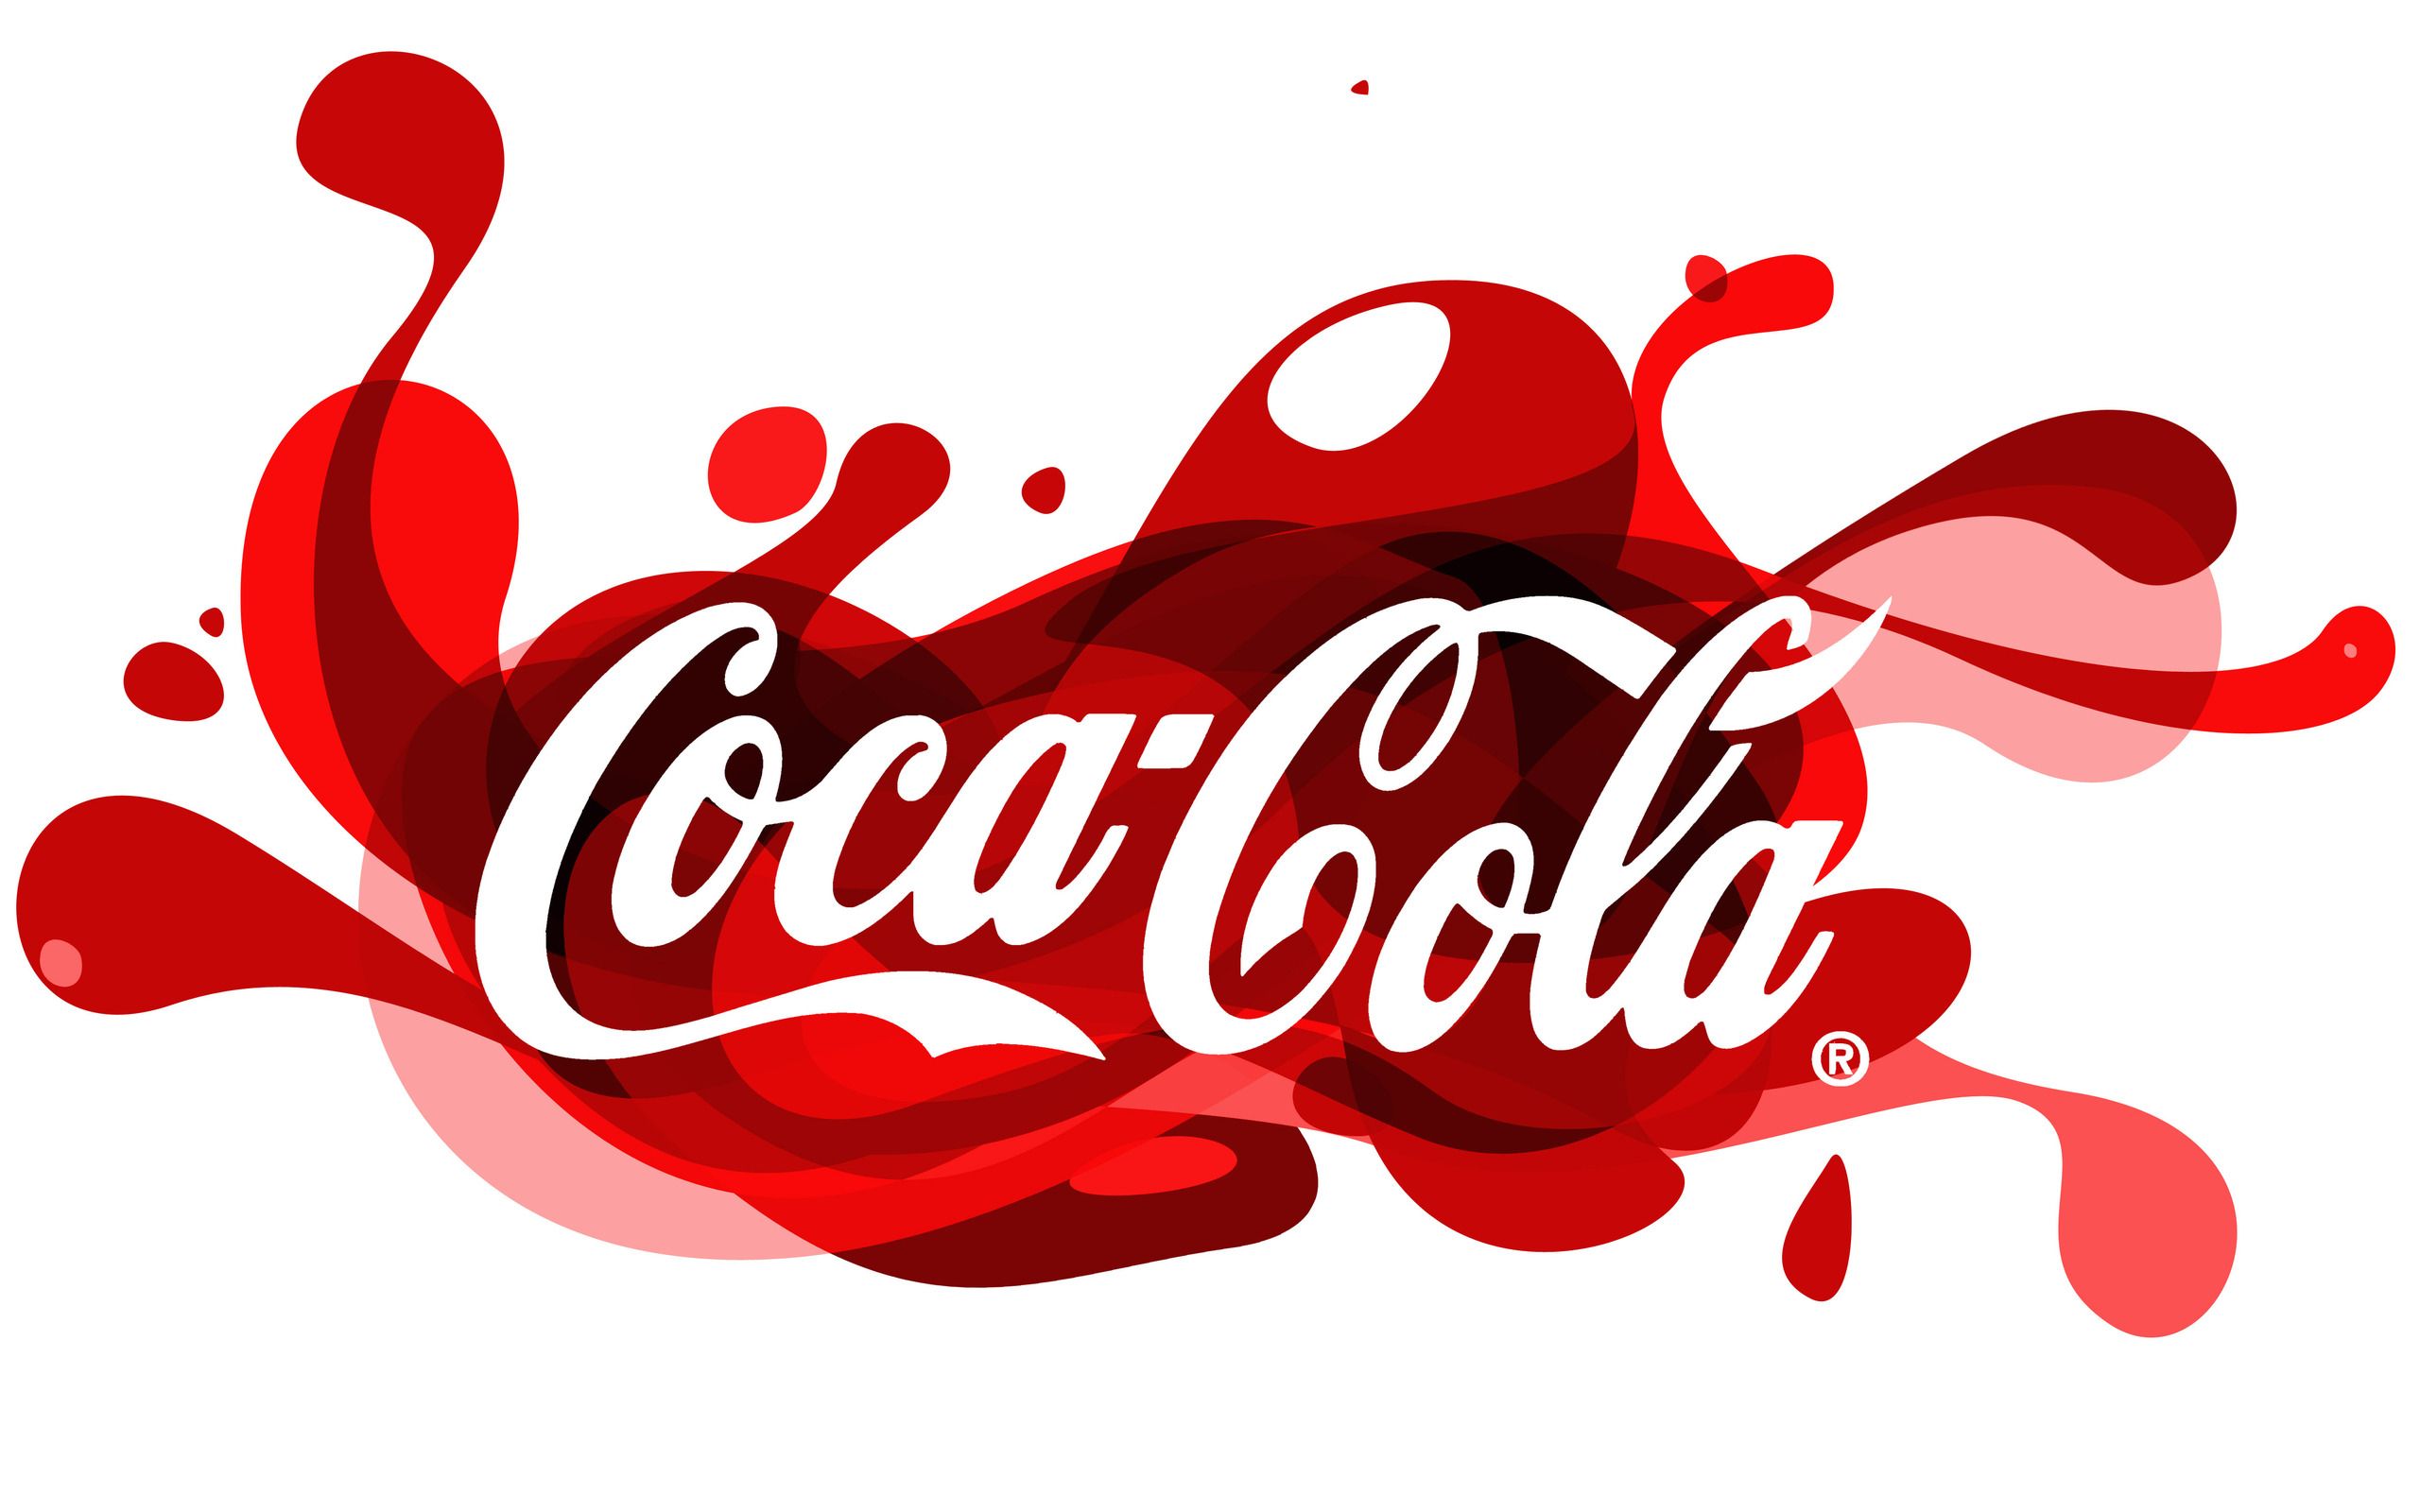 Cola 4K wallpaper for your desktop or mobile screen free and easy to download